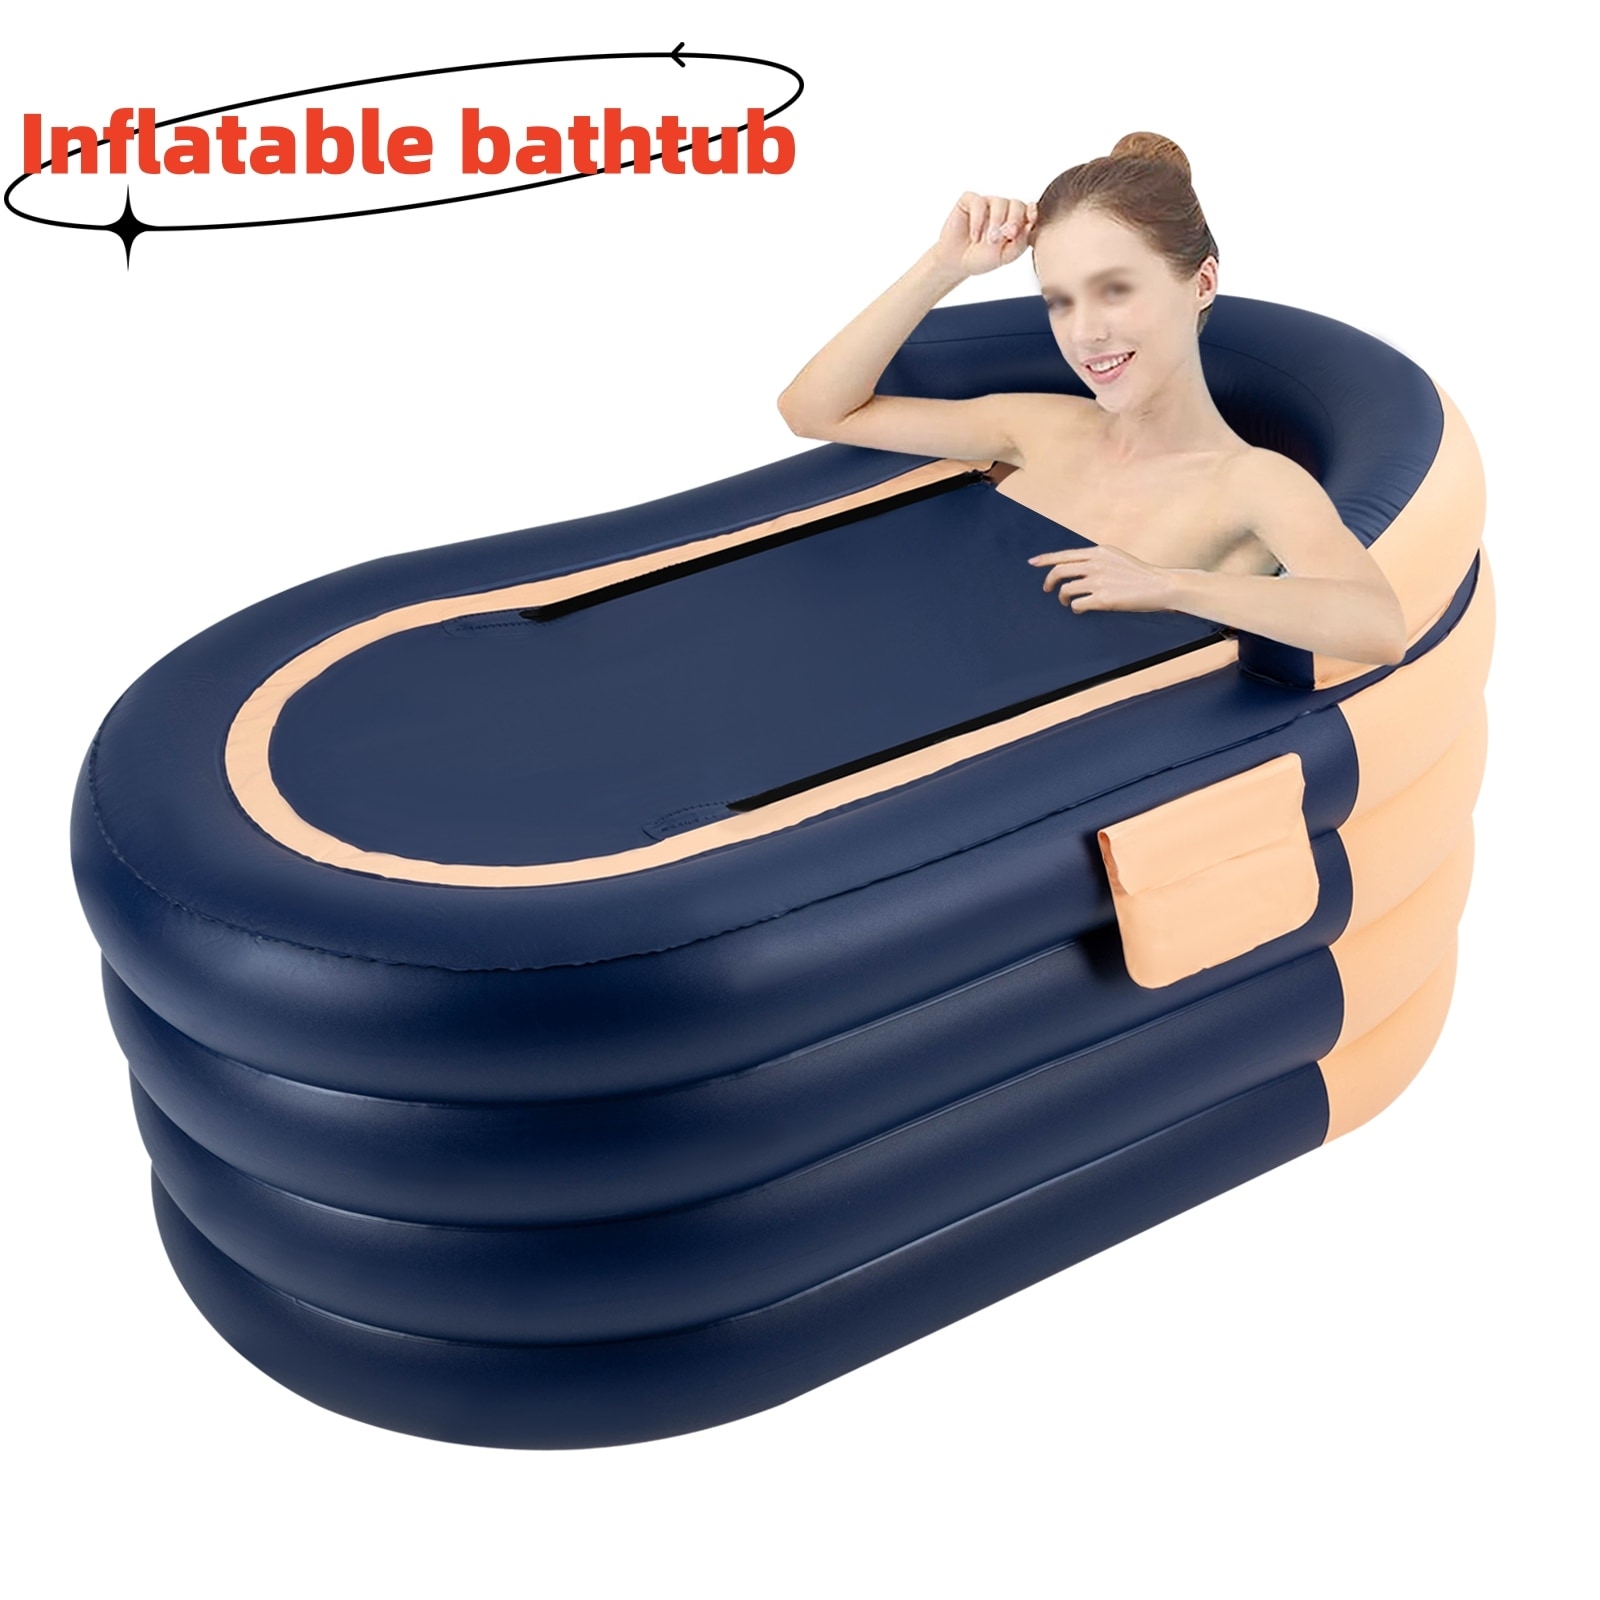 Home Spa Bath Equip Comfortable Inflatable Ring Foldable Baby Bath Bucket  Foldable Adult - Buy Home Spa Bath Equip Comfortable Inflatable Ring  Foldable Baby Bath Bucket Foldable Adult Product on